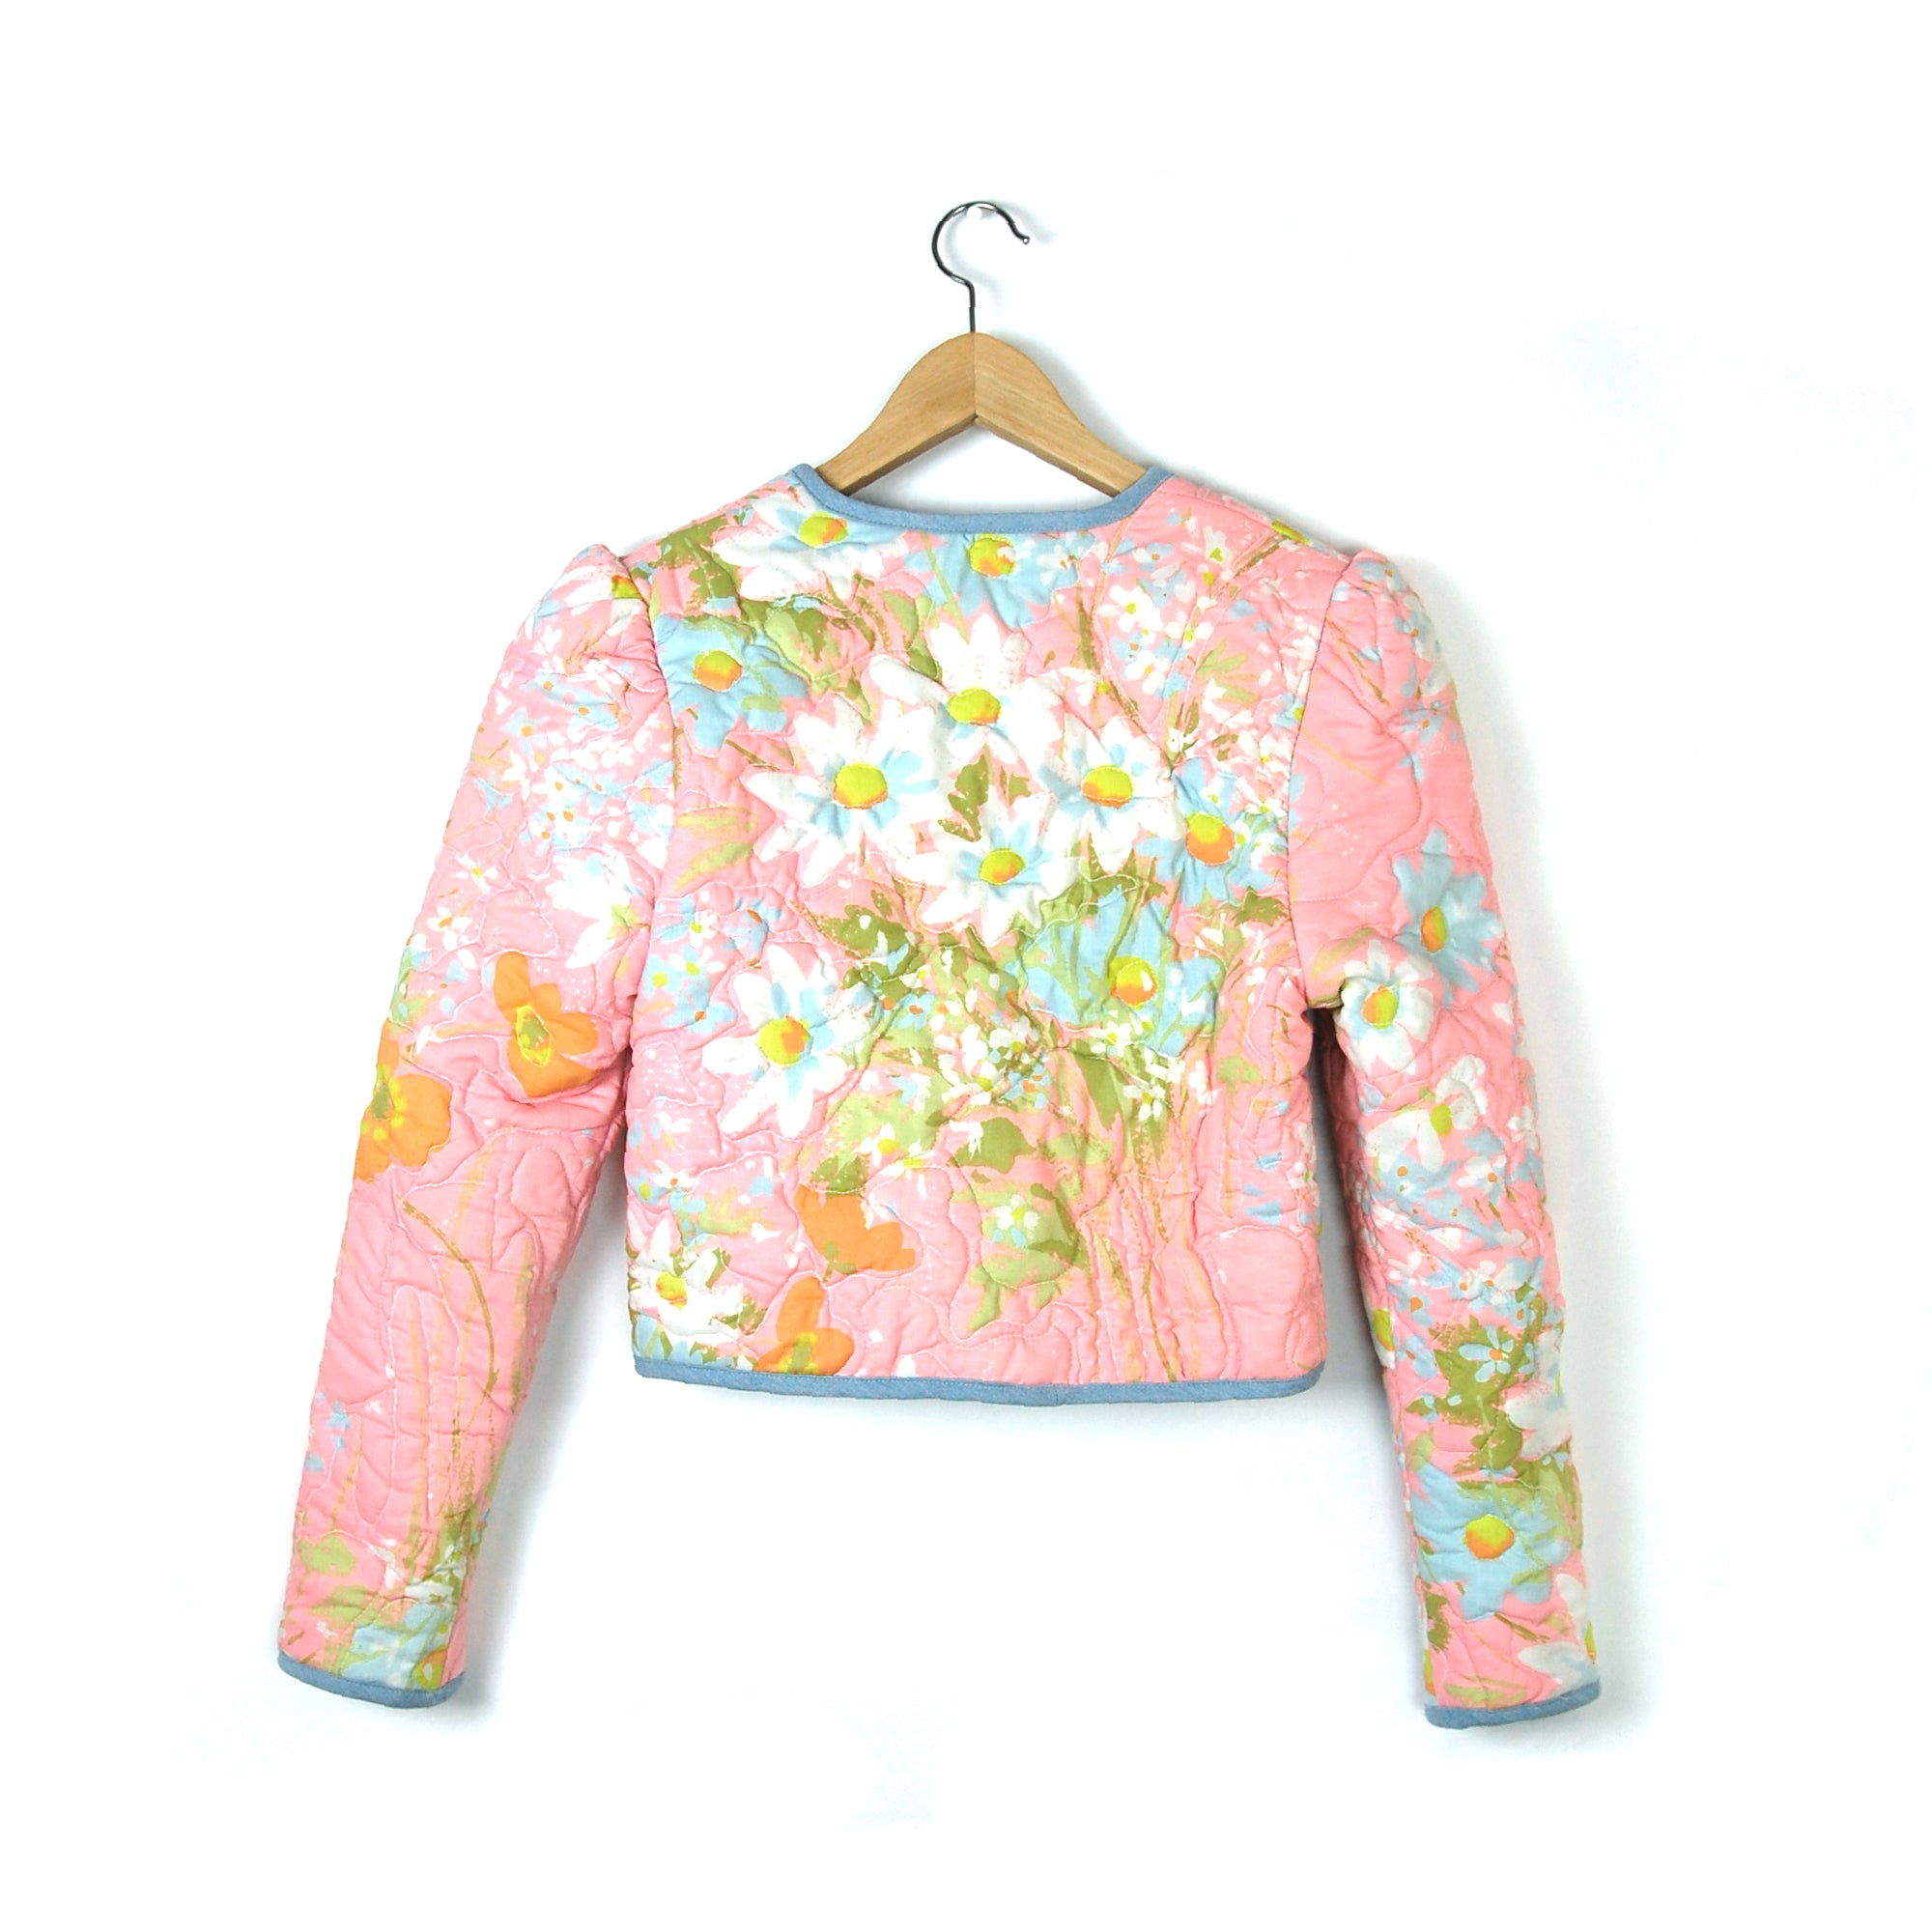 COTTON CANDY GARDEN 1 QUILTED JACKET - Late to the Party